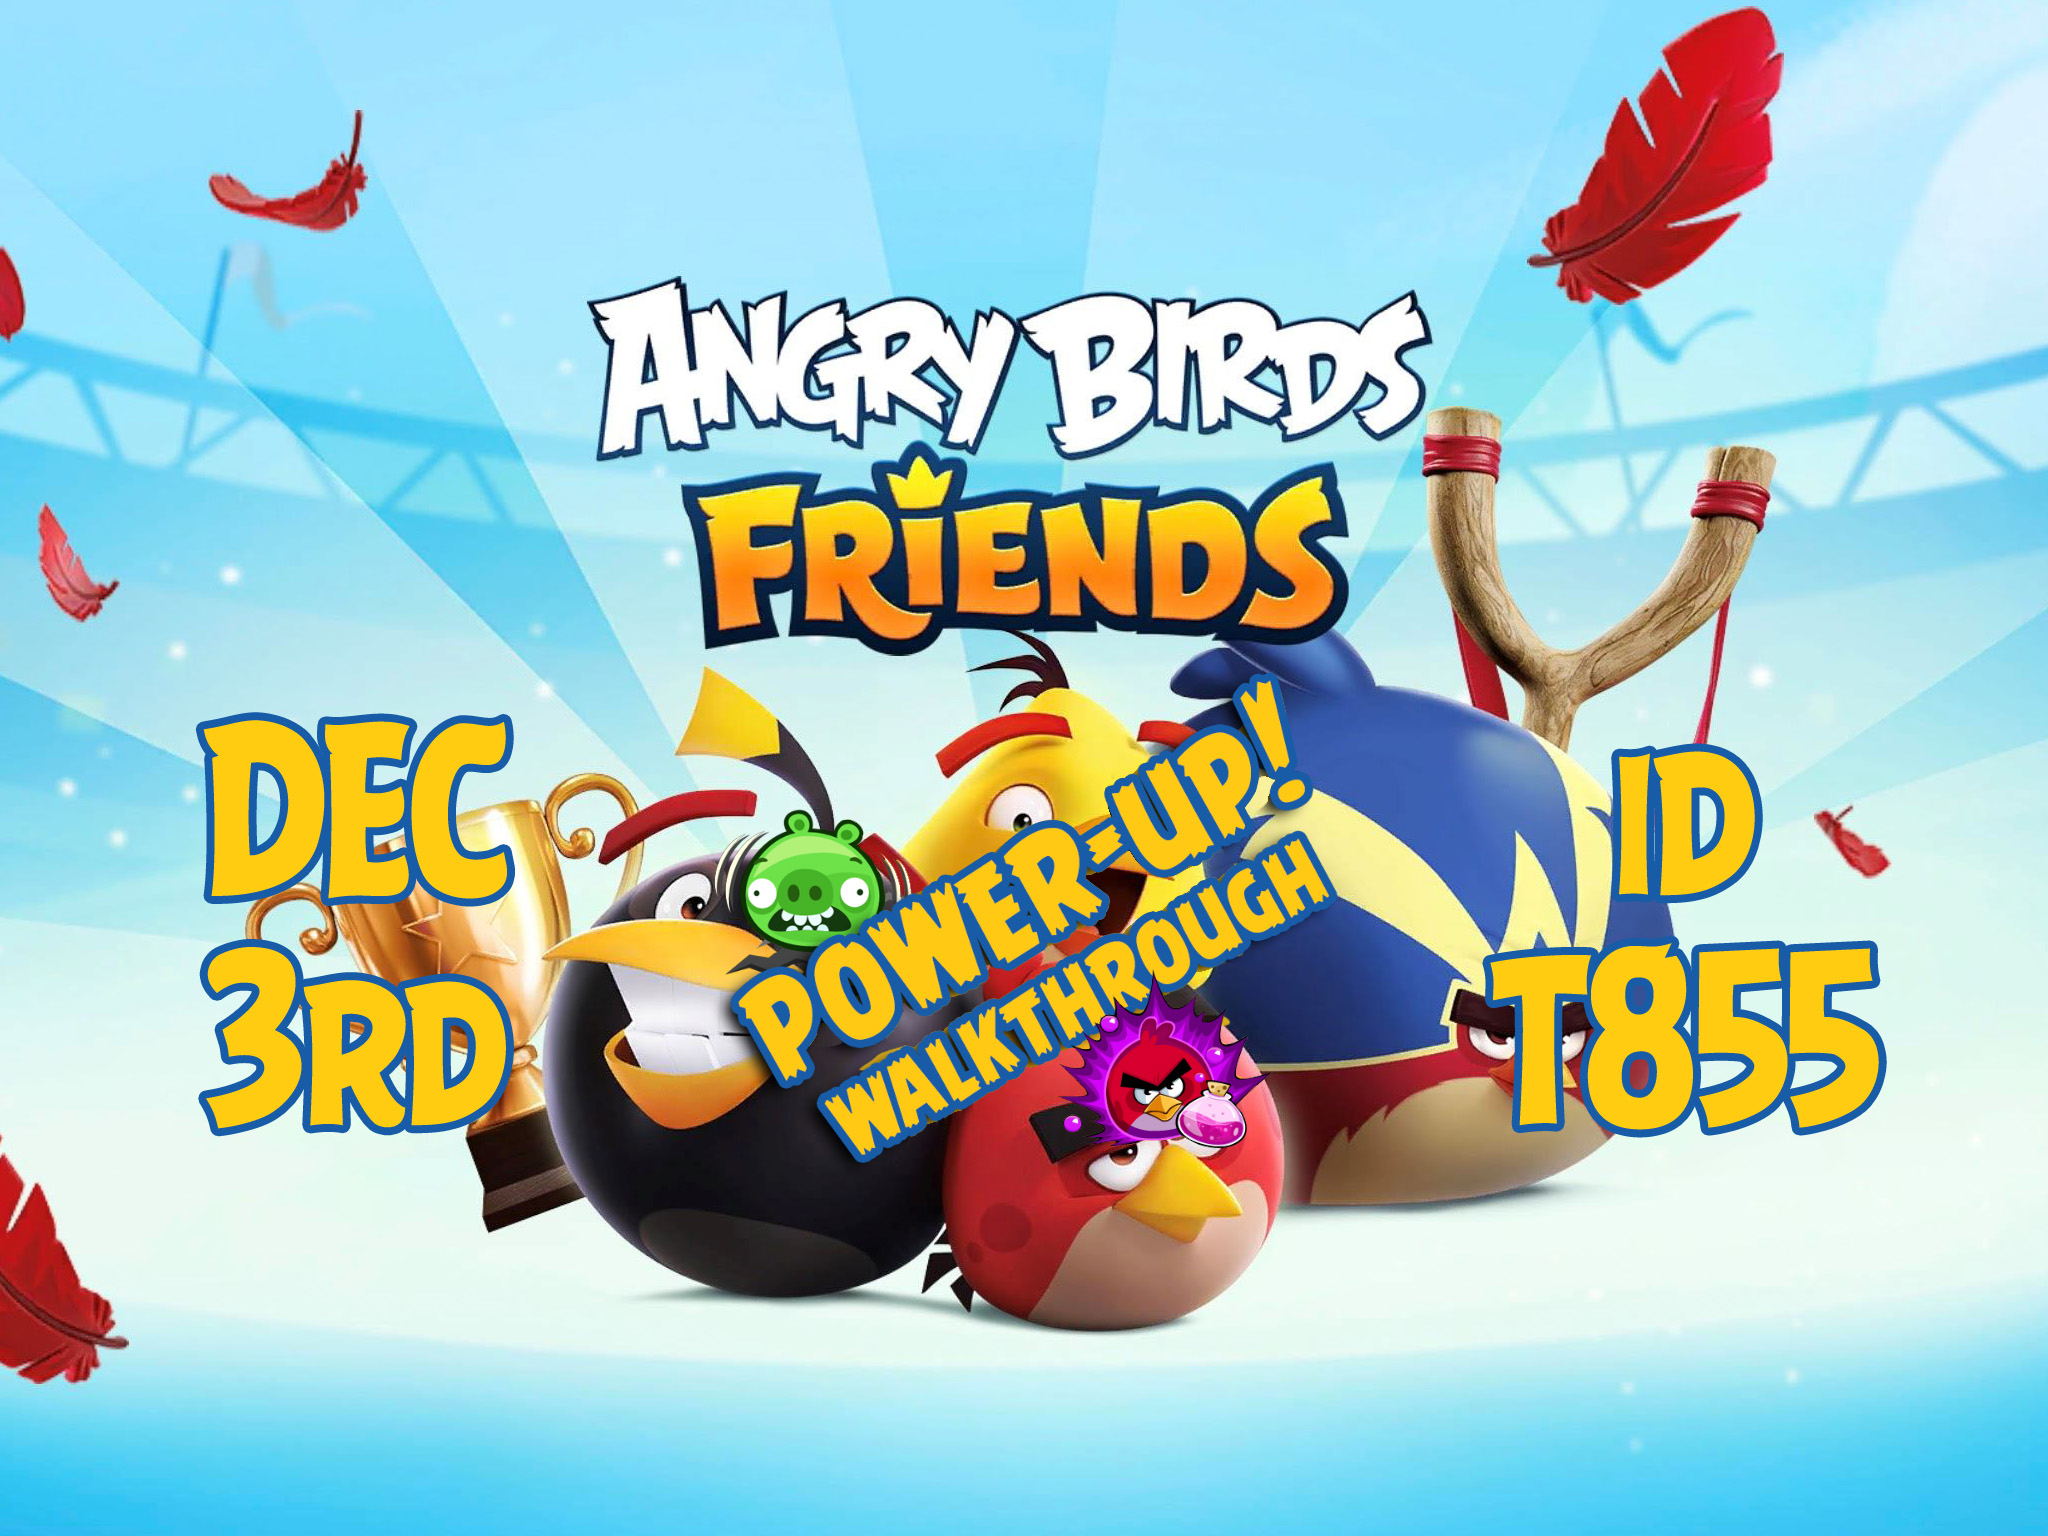 Angry-Birds-Friends-Tournament-T855-Feature-Image-PU